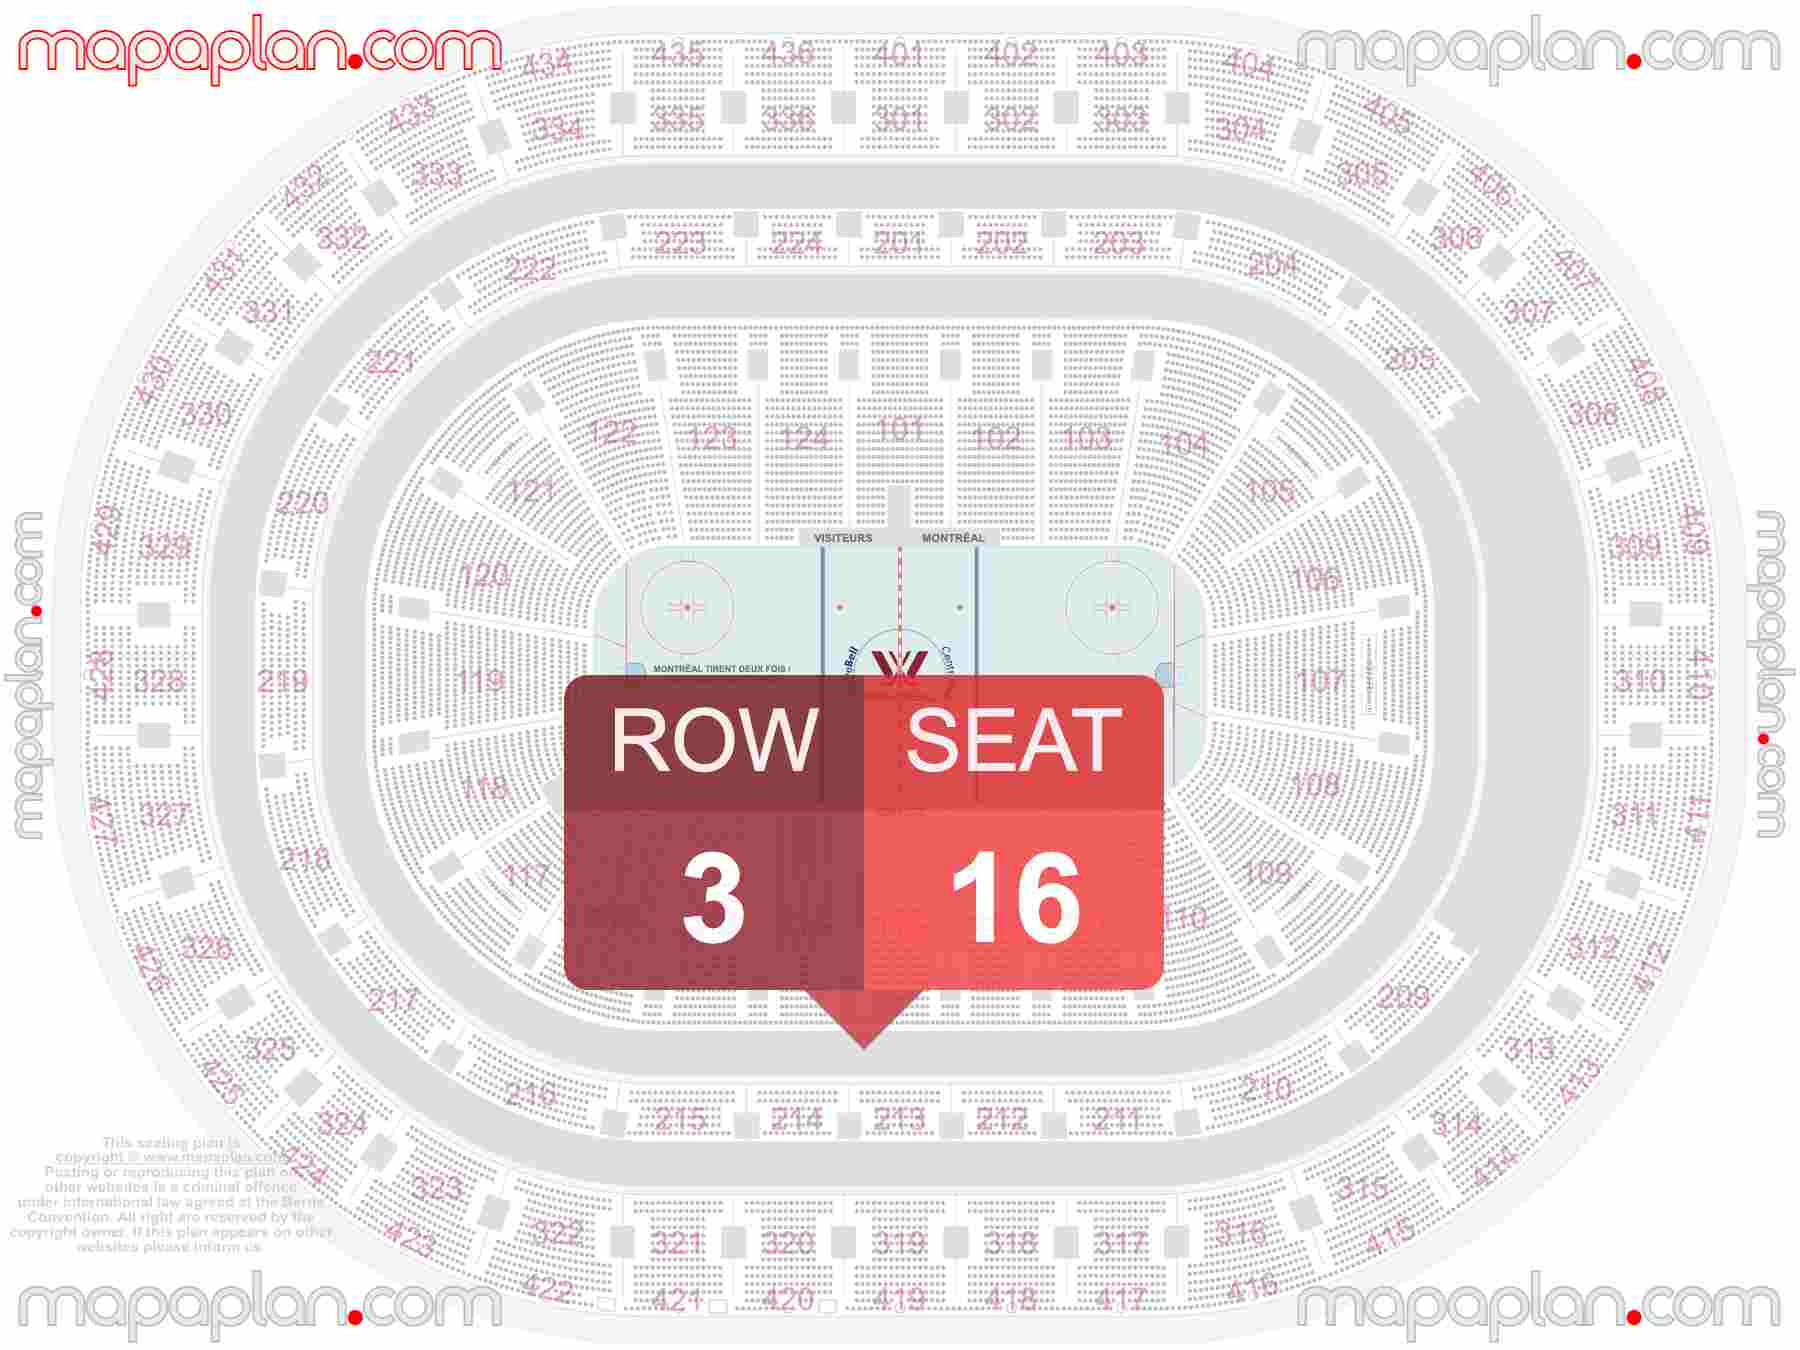 Montreal Bell Centre seating map Canadiens hockey inside capacity view arrangement chart - Interactive virtual 3d best seats & rows detailed stadium image configuration layout